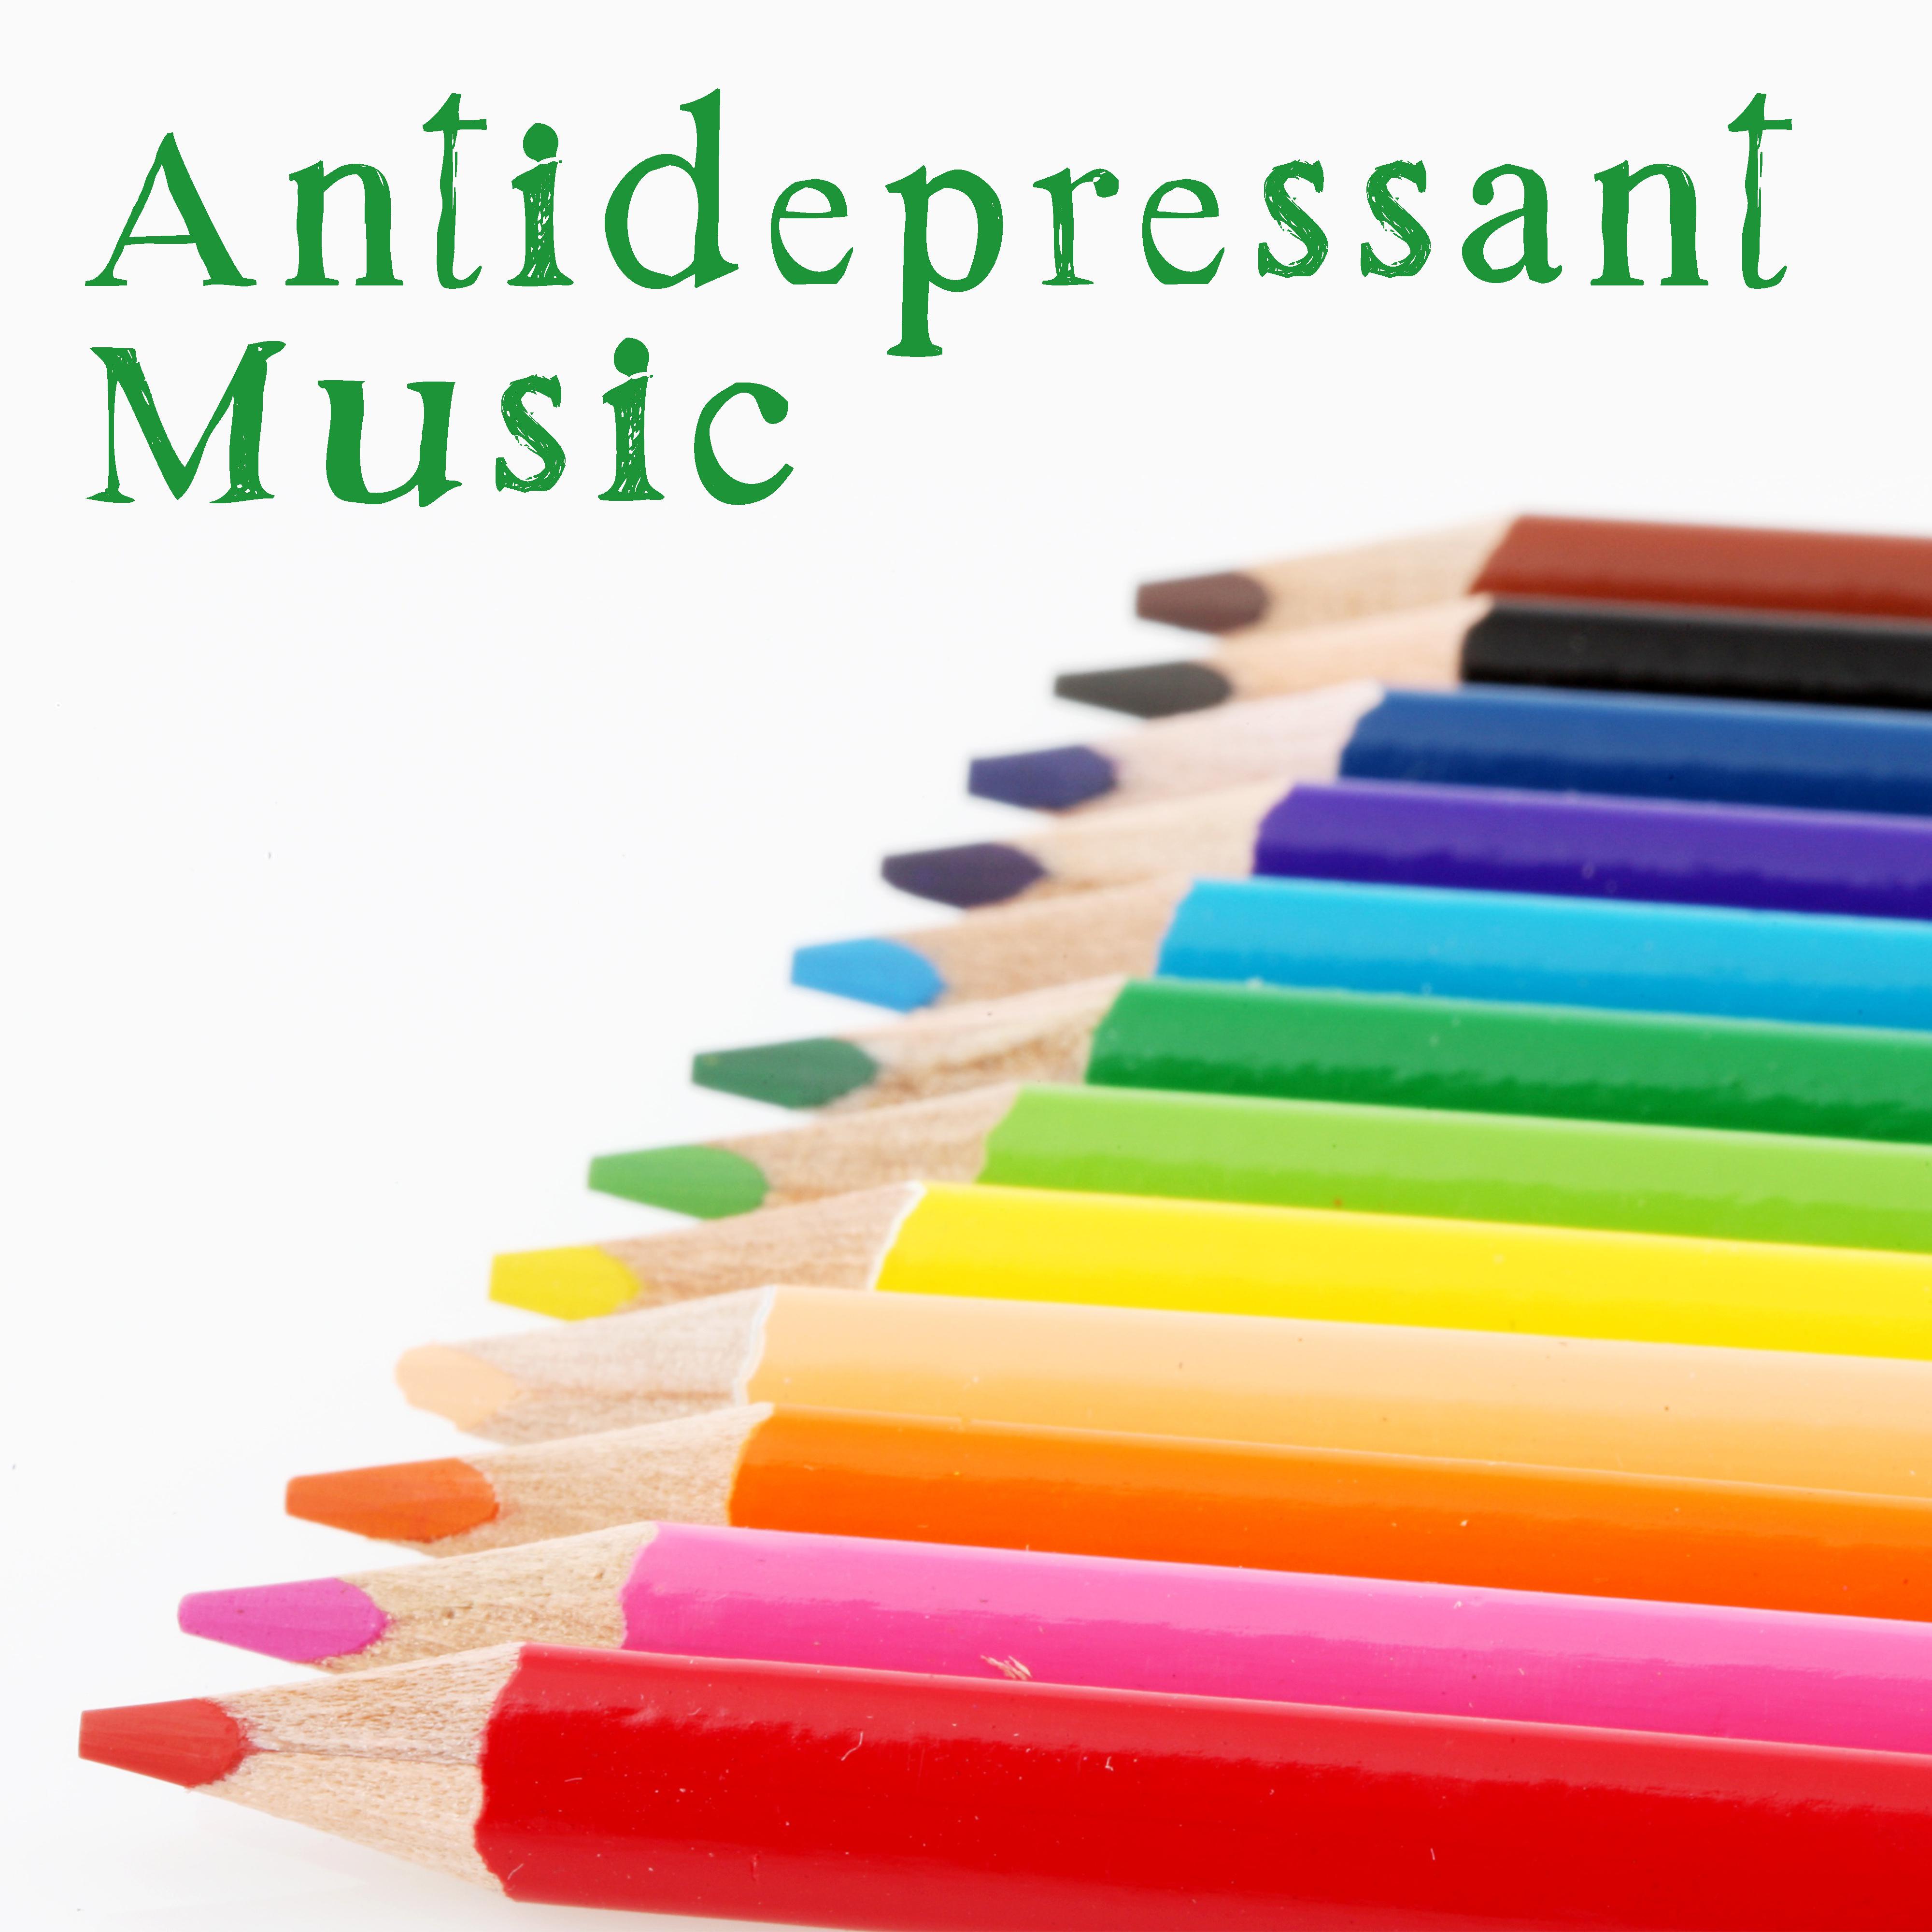 Antidepressant Music  Happy Jazz for Sad Souls, Positive Thinking, Therapy Music, Jazz for Good Mood, Happiness, Ambient Music